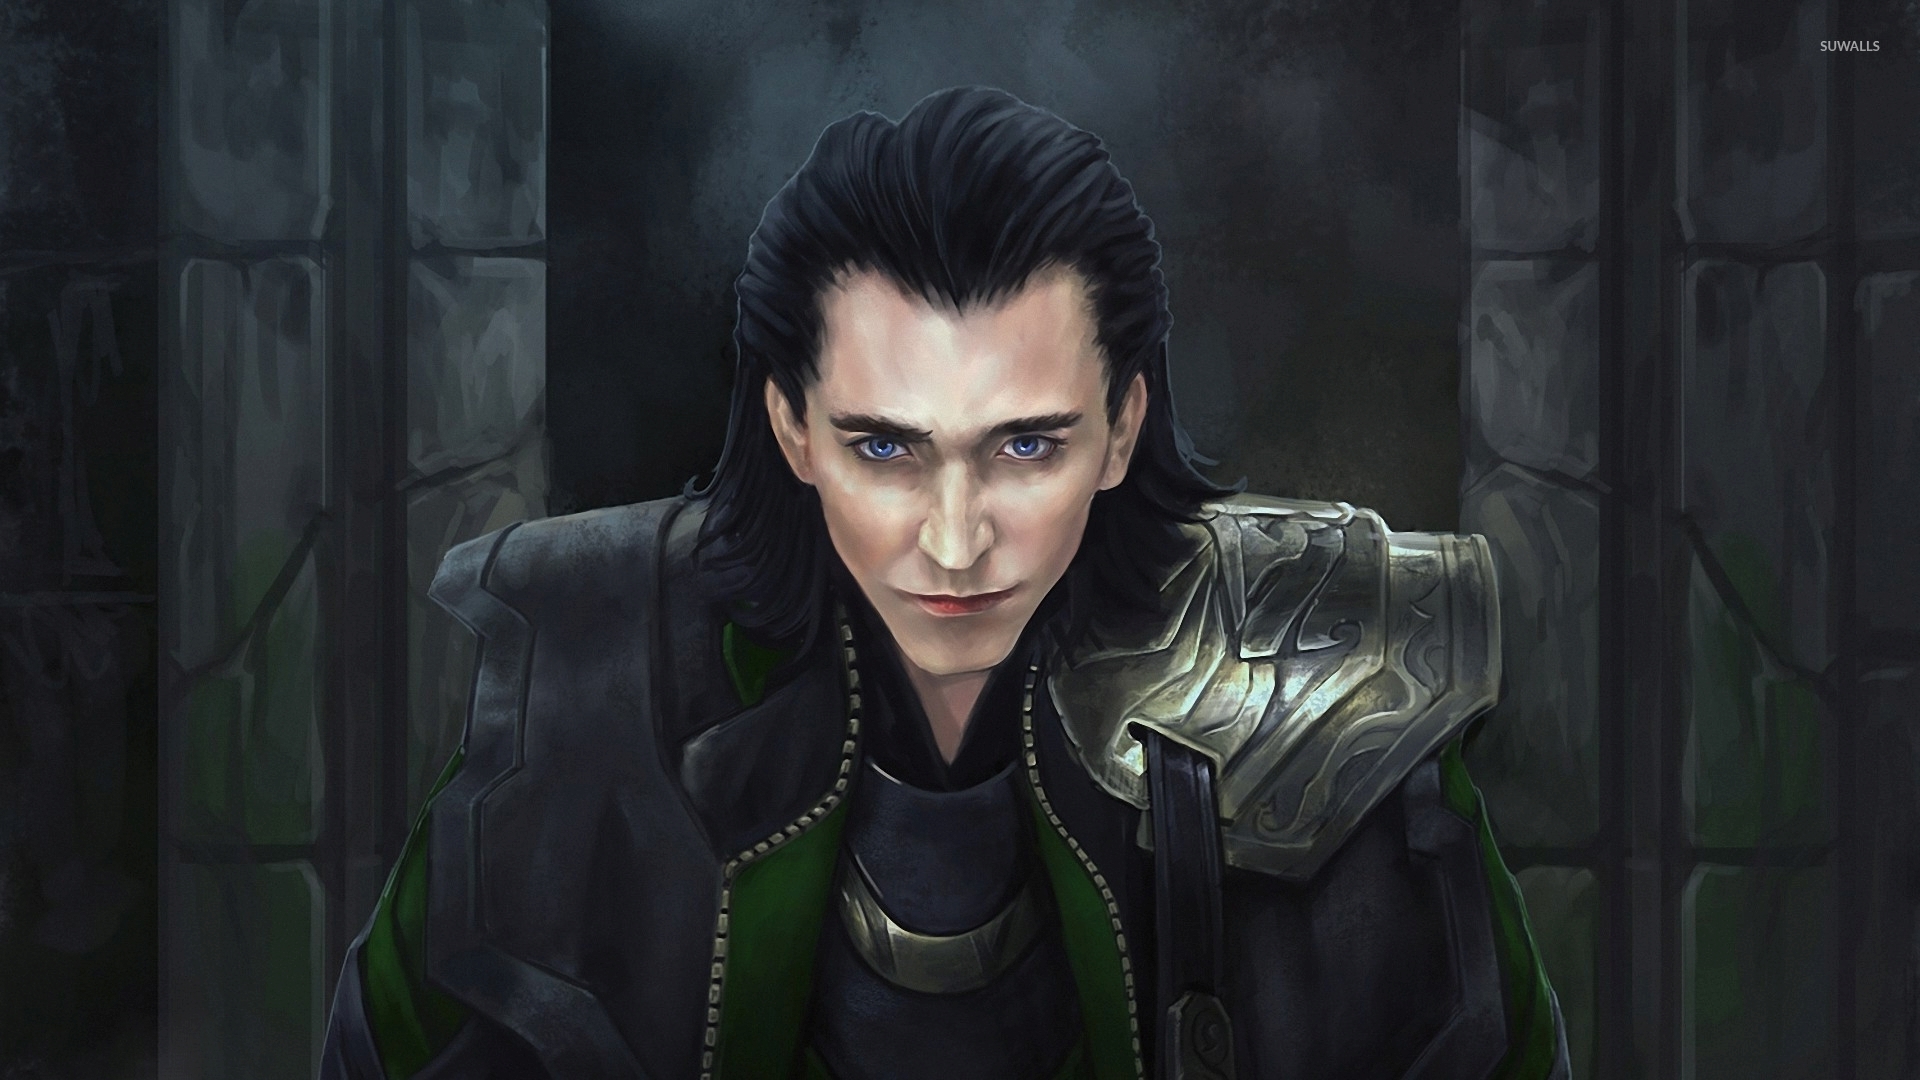 Loki colluding - The Avengers wallpaper - Movie wallpapers - #48655